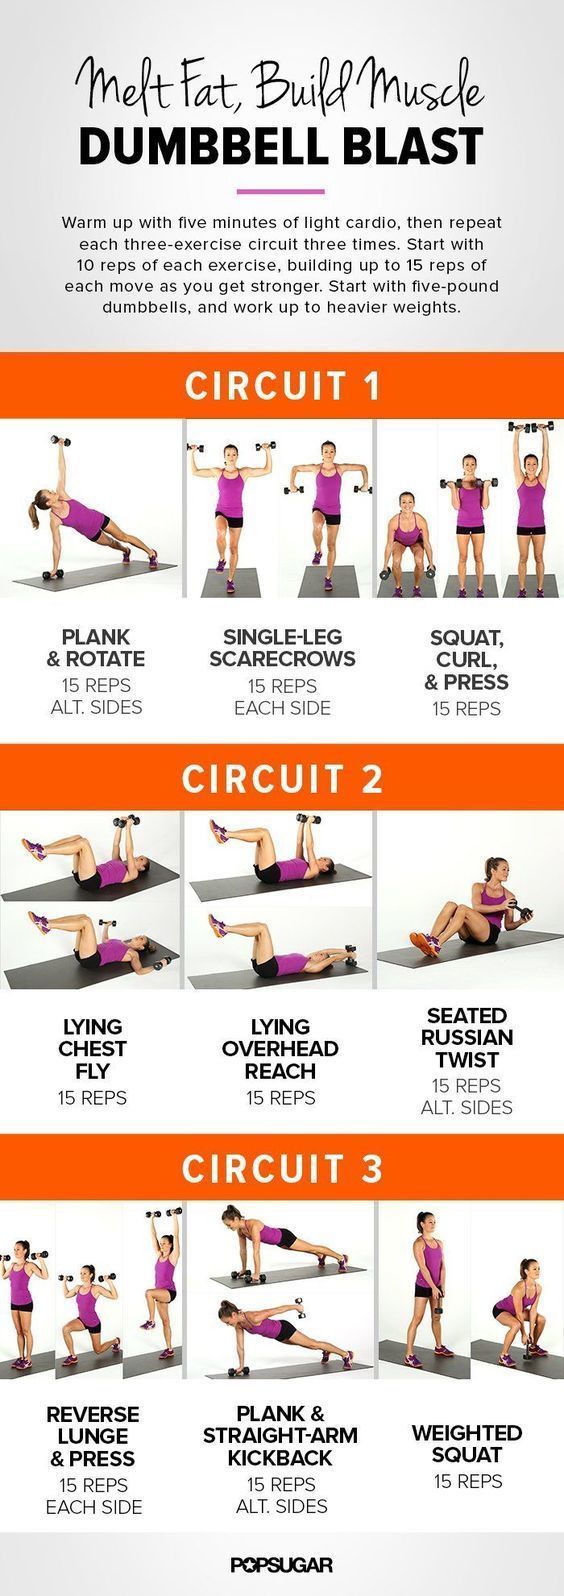 51 Fat Burning Workouts That Fit Into ANY Busy Schedule - 51 Fat Burning Workouts That Fit Into ANY Busy Schedule -   19 fitness Routine gym ideas